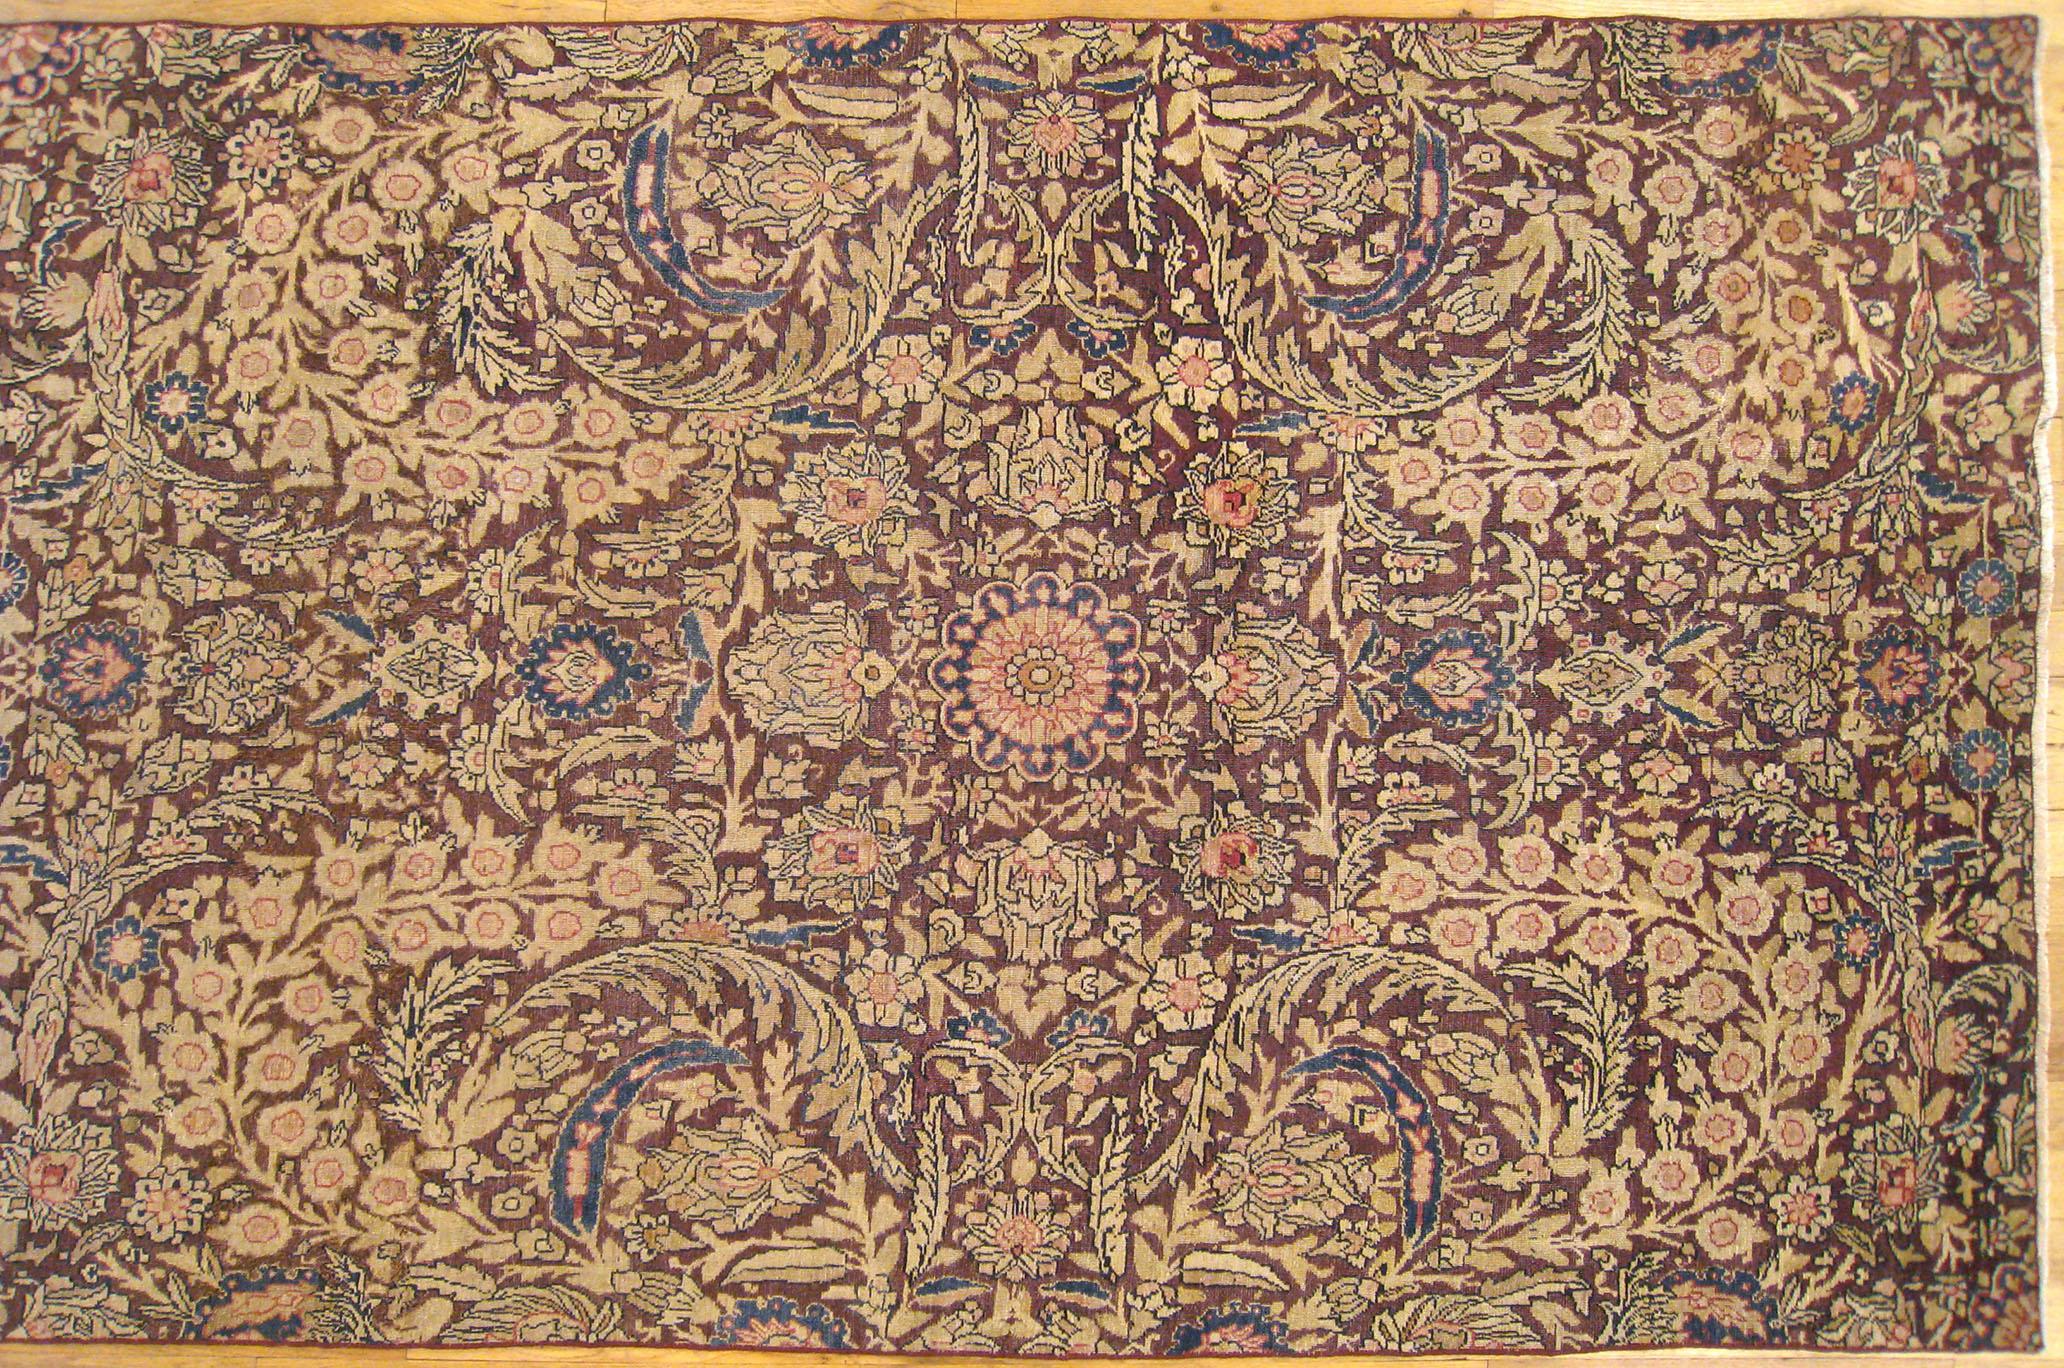 East Asian Antique Borderless Persian Lavar Oriental Rug, in Gallery size, Repeating Floral For Sale